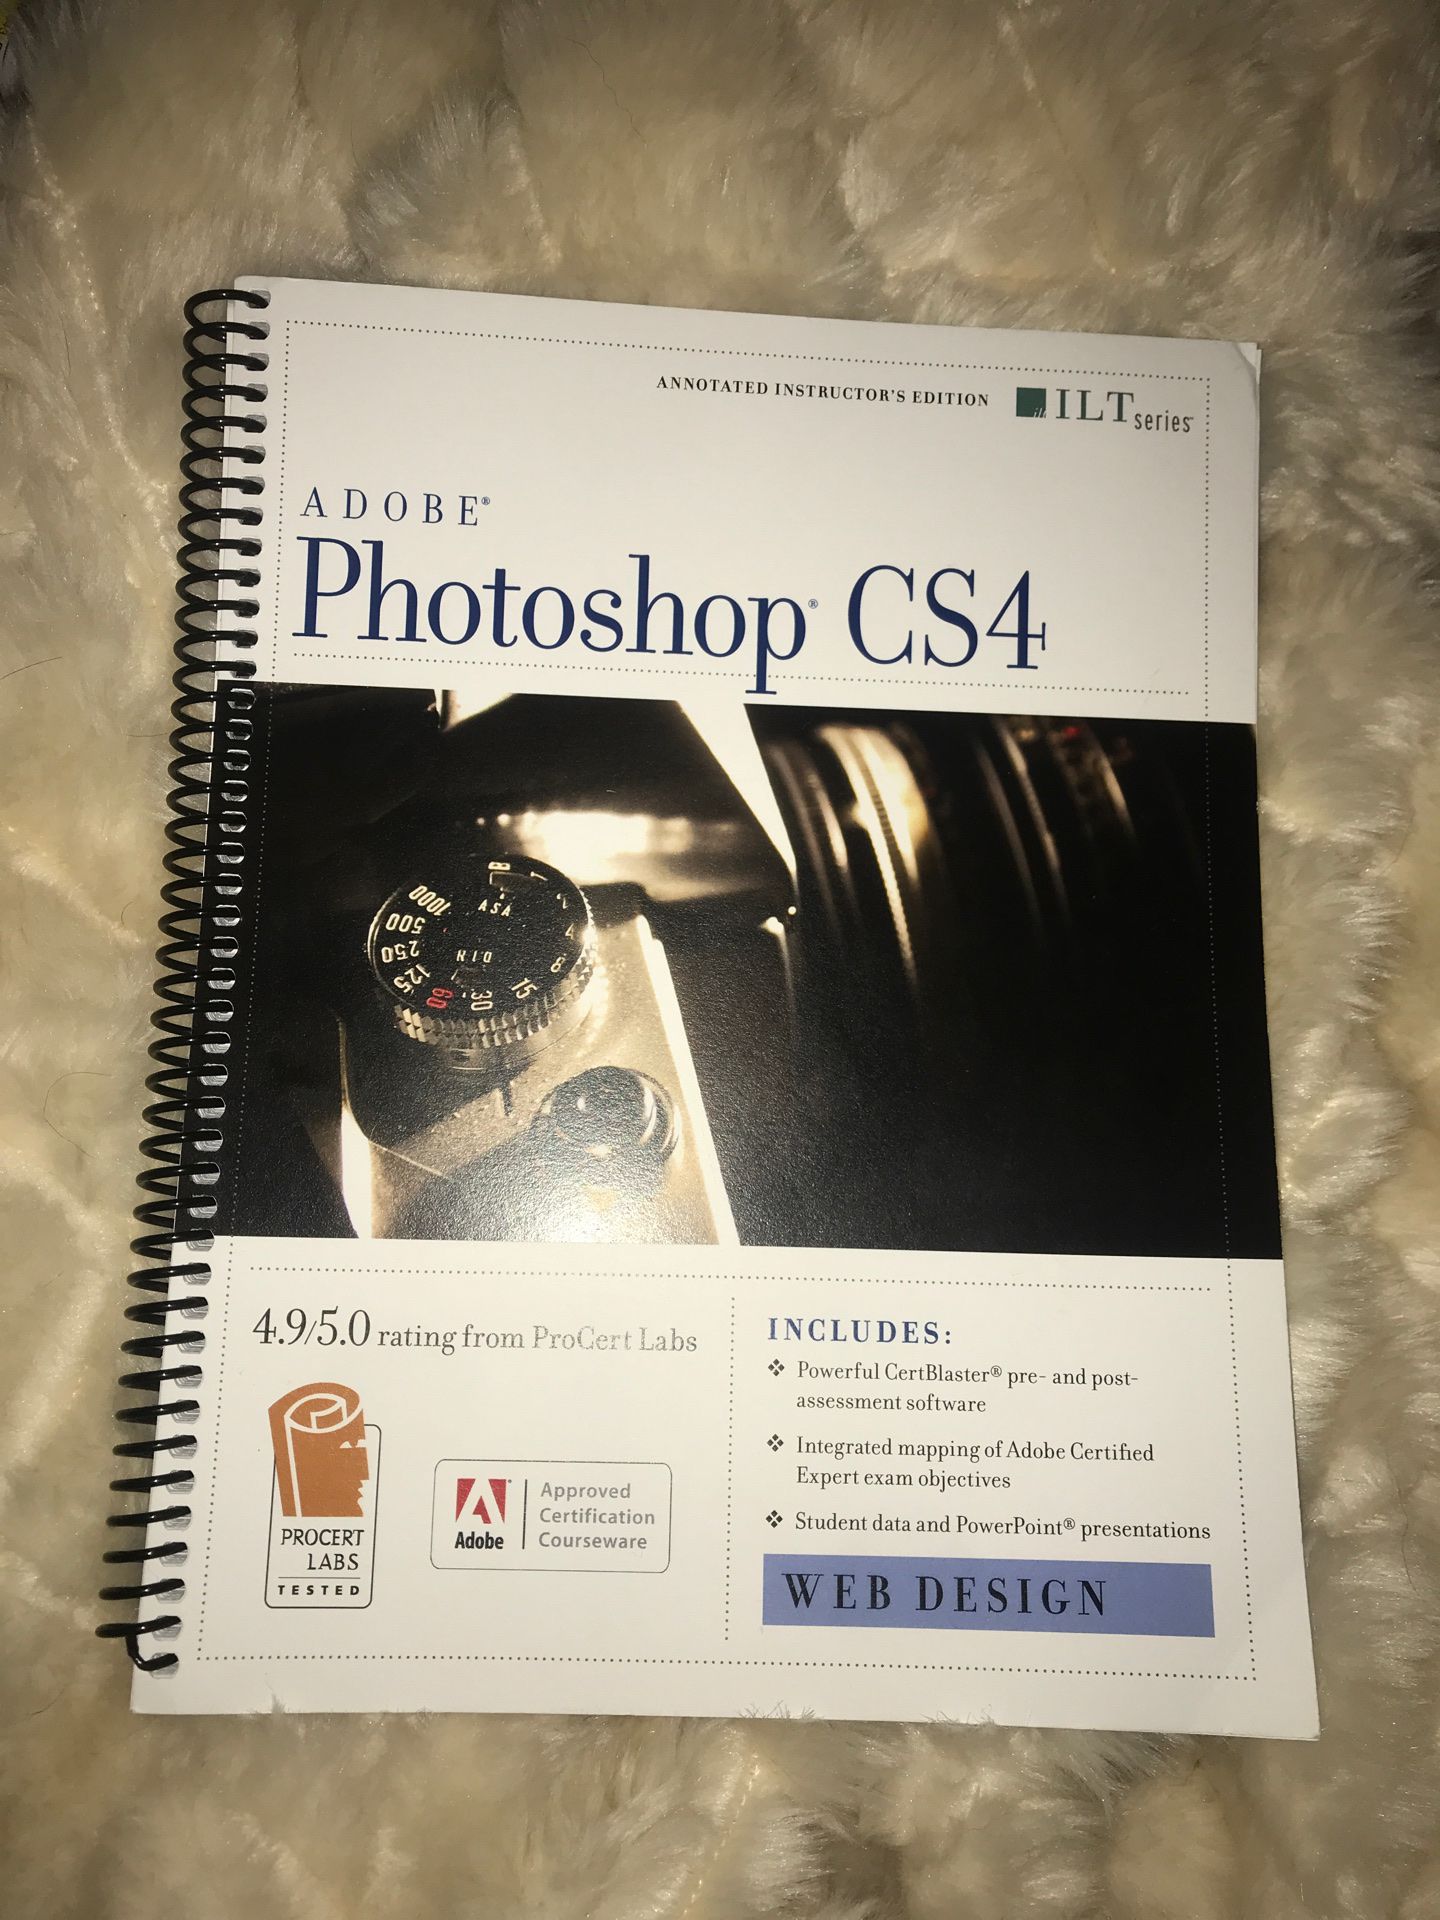 Adobe Photoshop CS4 Annotated Instructor’s Edition with Photoshop CS4: Web Design ACE Edition CD-ROM